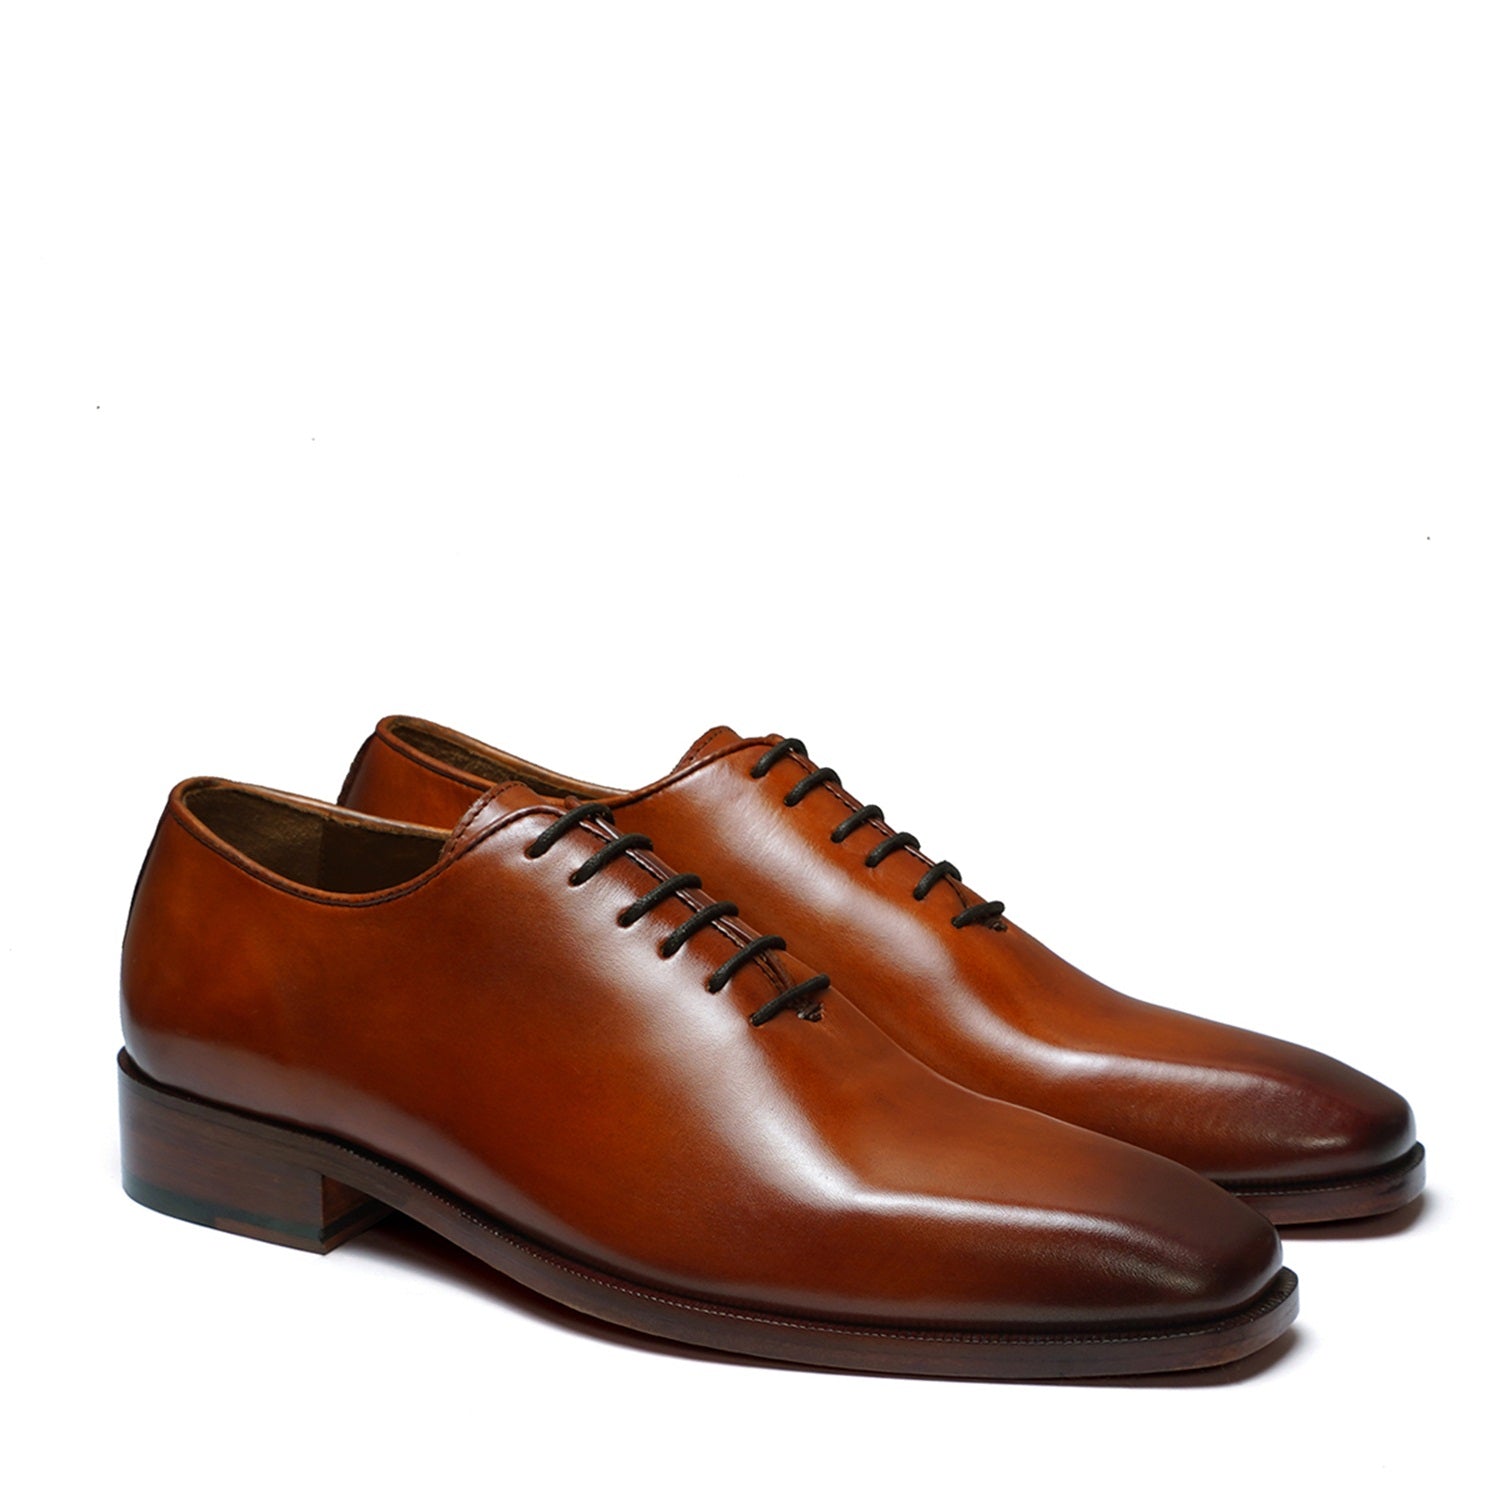 Burnished Tan Oxford Shoes